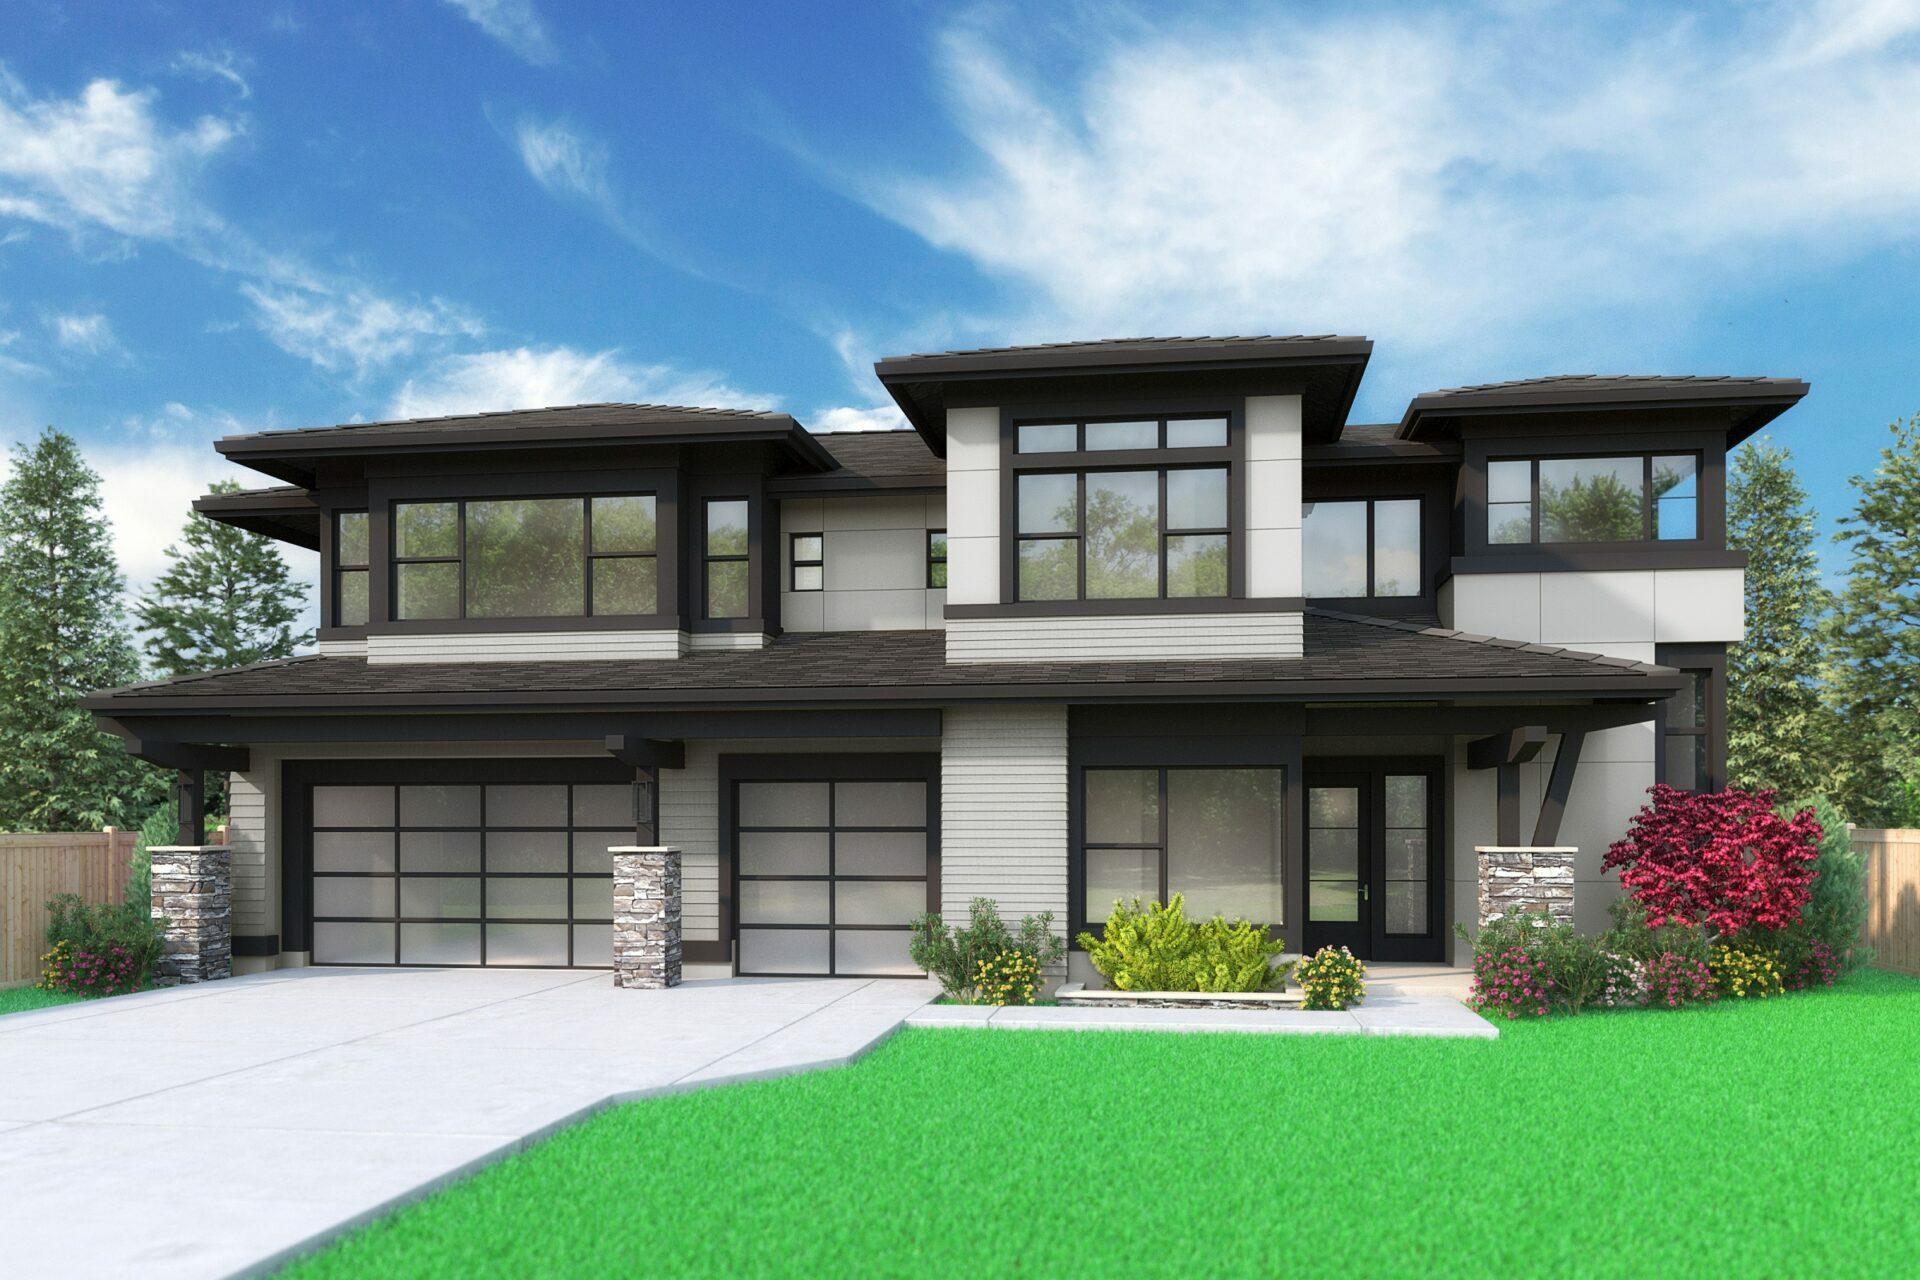 View our new luxury home construction on 12842 NE 113th St, in Kirkland, WA from MN Custom Homes